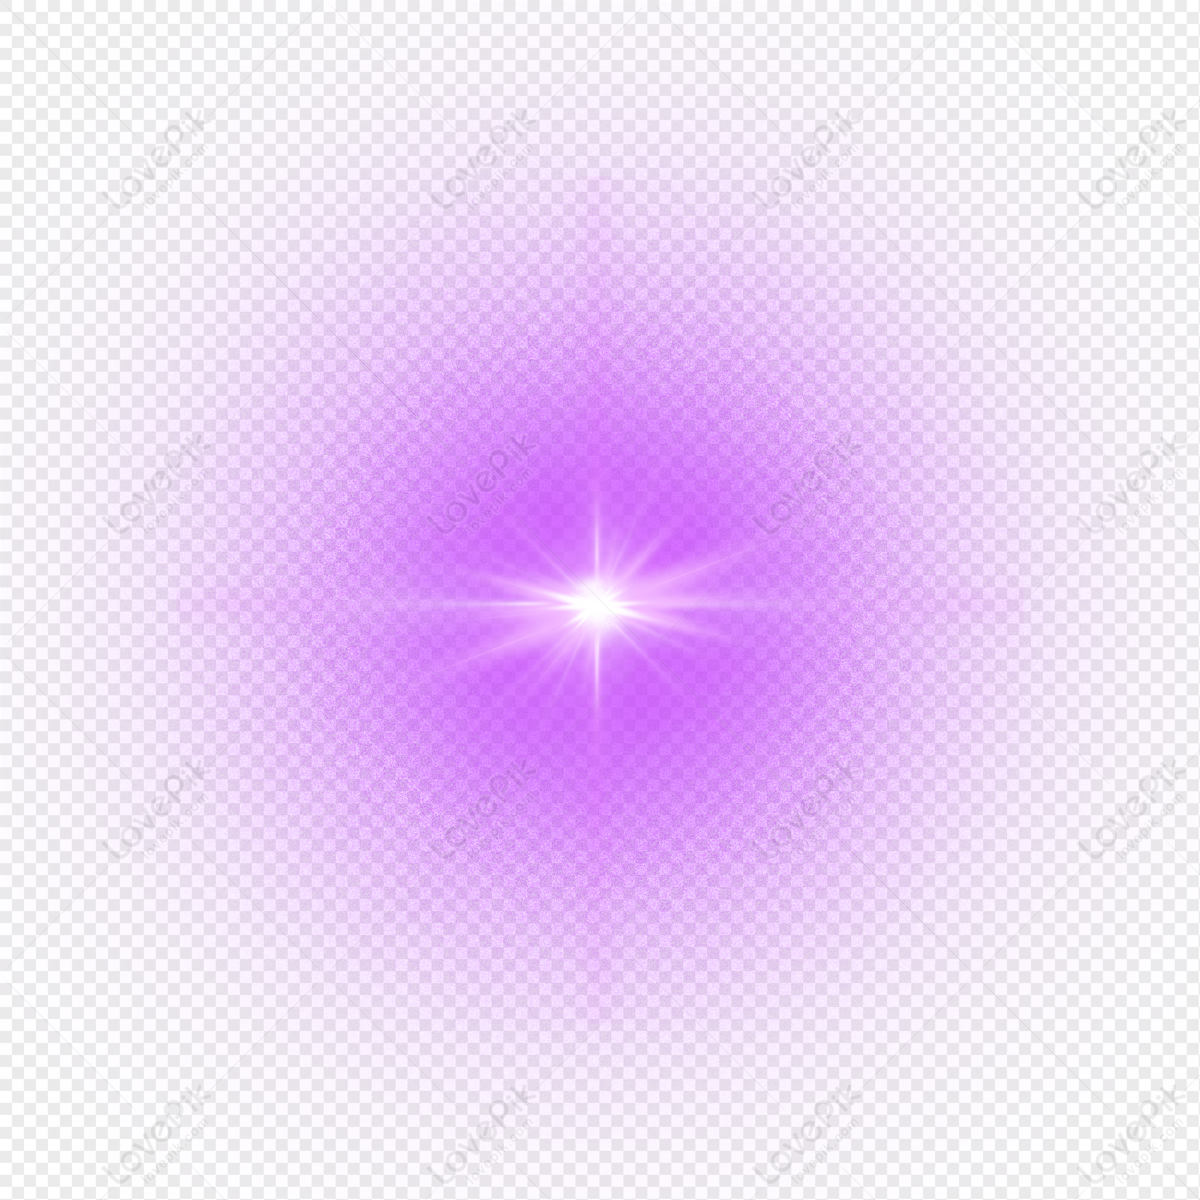 Purple Light PNG Images With Transparent Background | Free ...